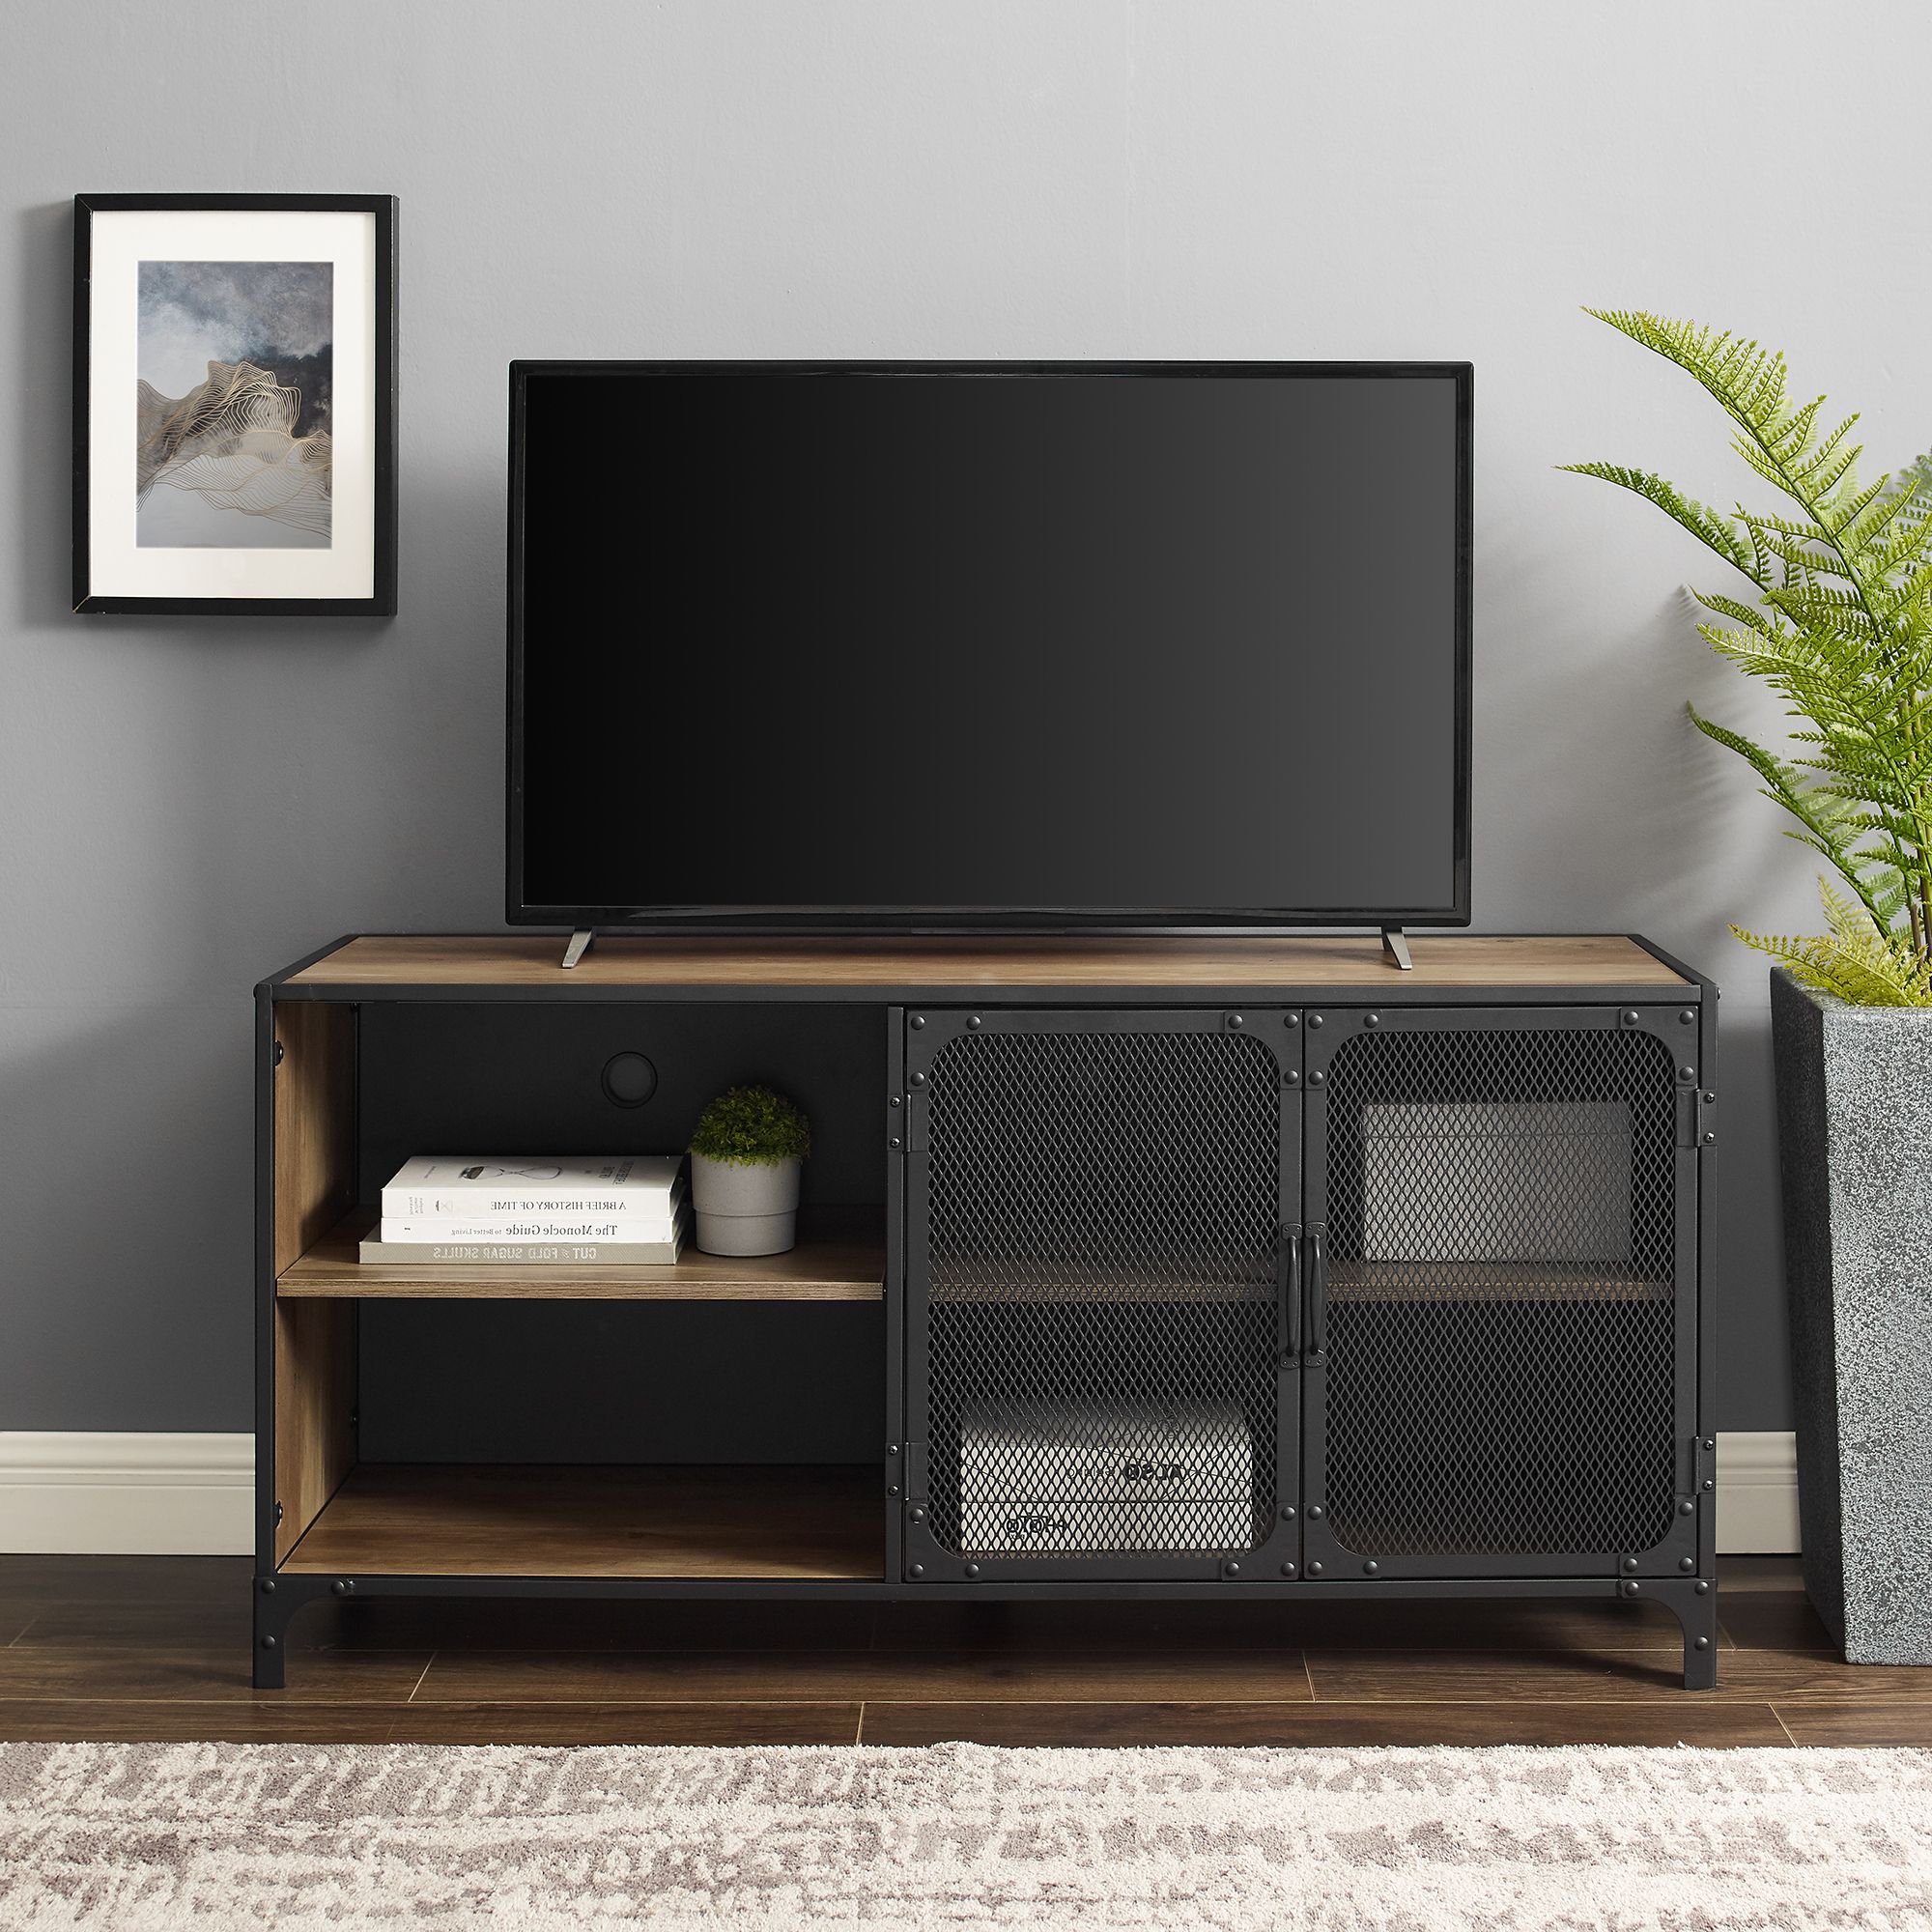 Manor Park Industrial Tv Stand For Tvs Up To 58 Pertaining To Kamari Tv Stands For Tvs Up To 58" (View 2 of 20)